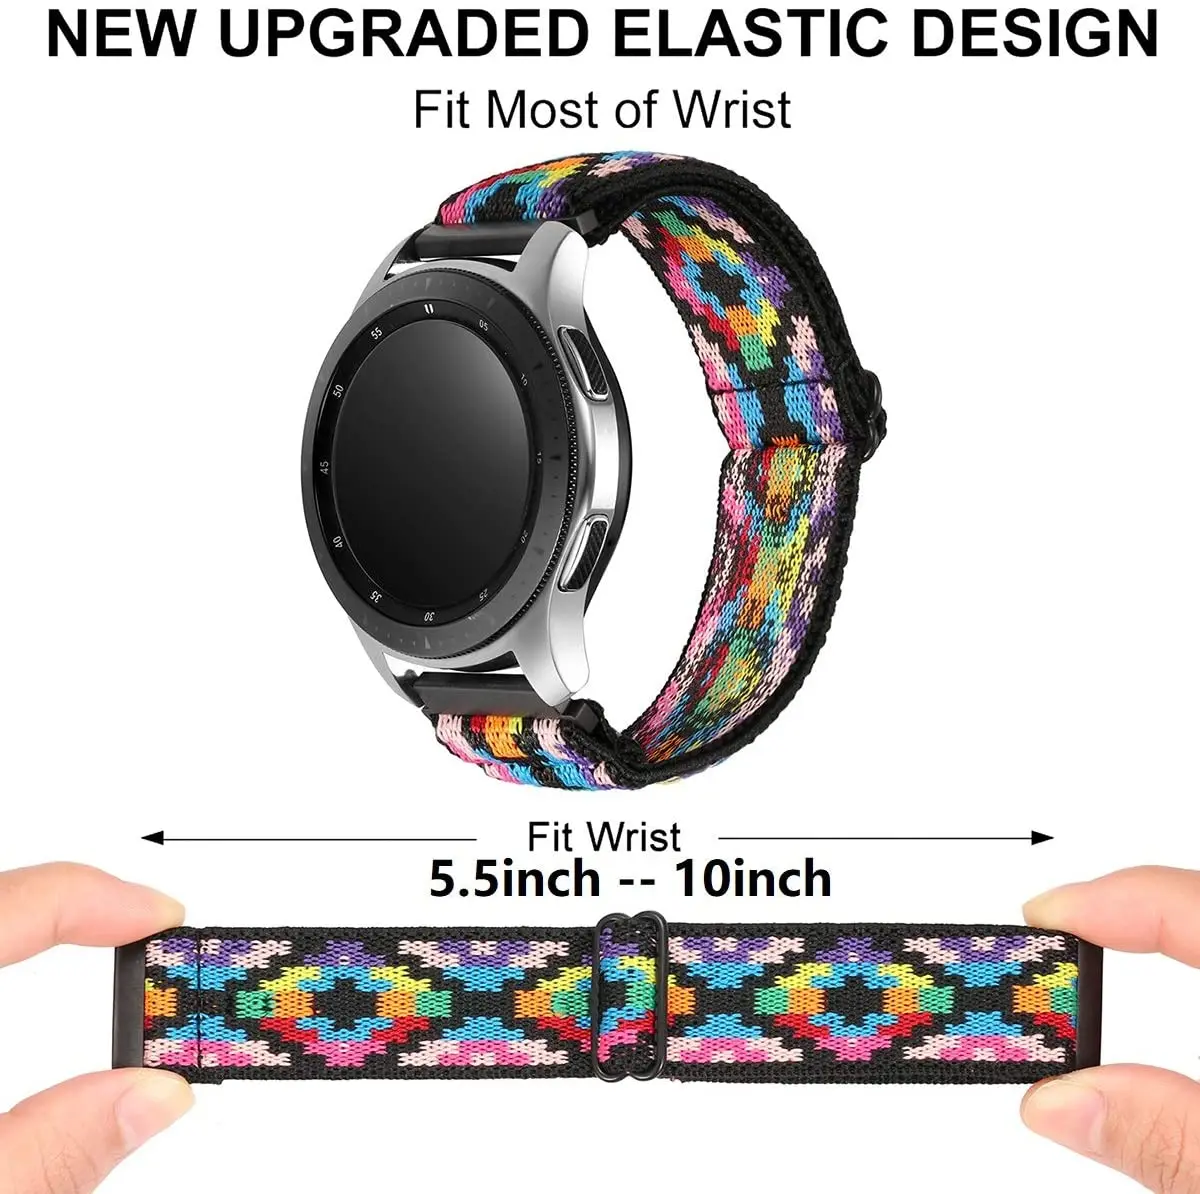 Nylon strap For Samsung Galaxy watch 4/classic/46mm/Active 2/Gear S3/amazfit Adjustable Elastic bracelet Huawei GT 2/3 Pro band 3